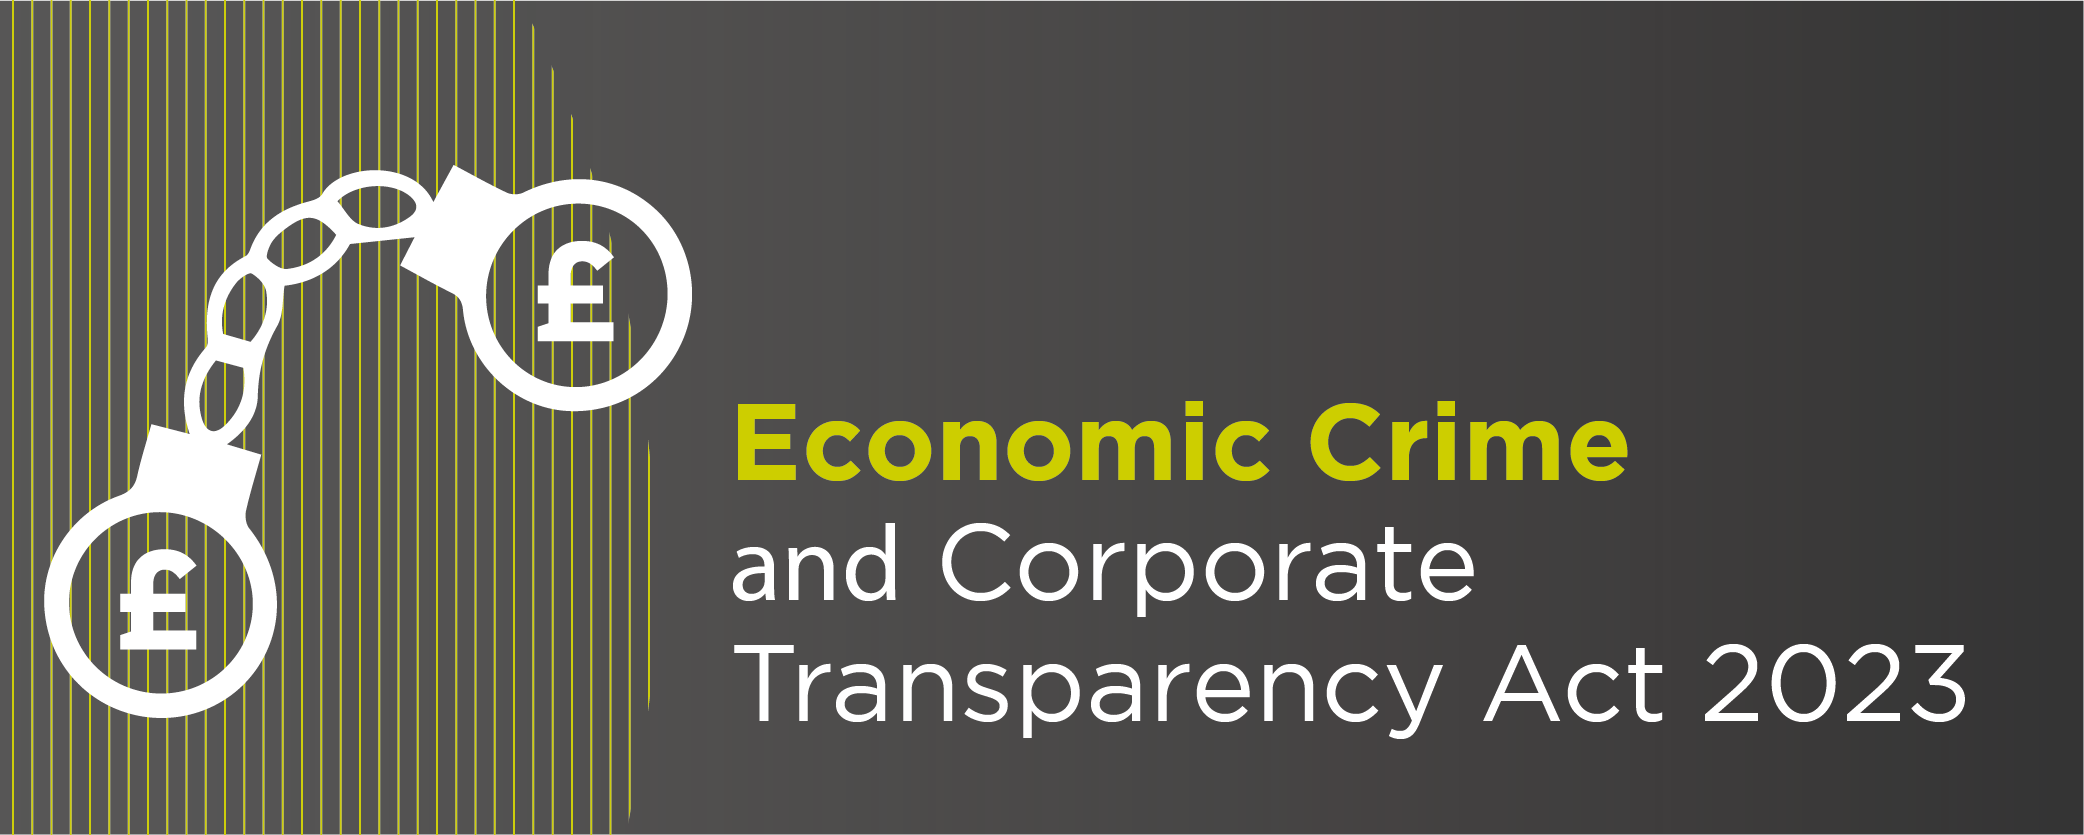 Economic Crime and Corporate Transparency Act 2023